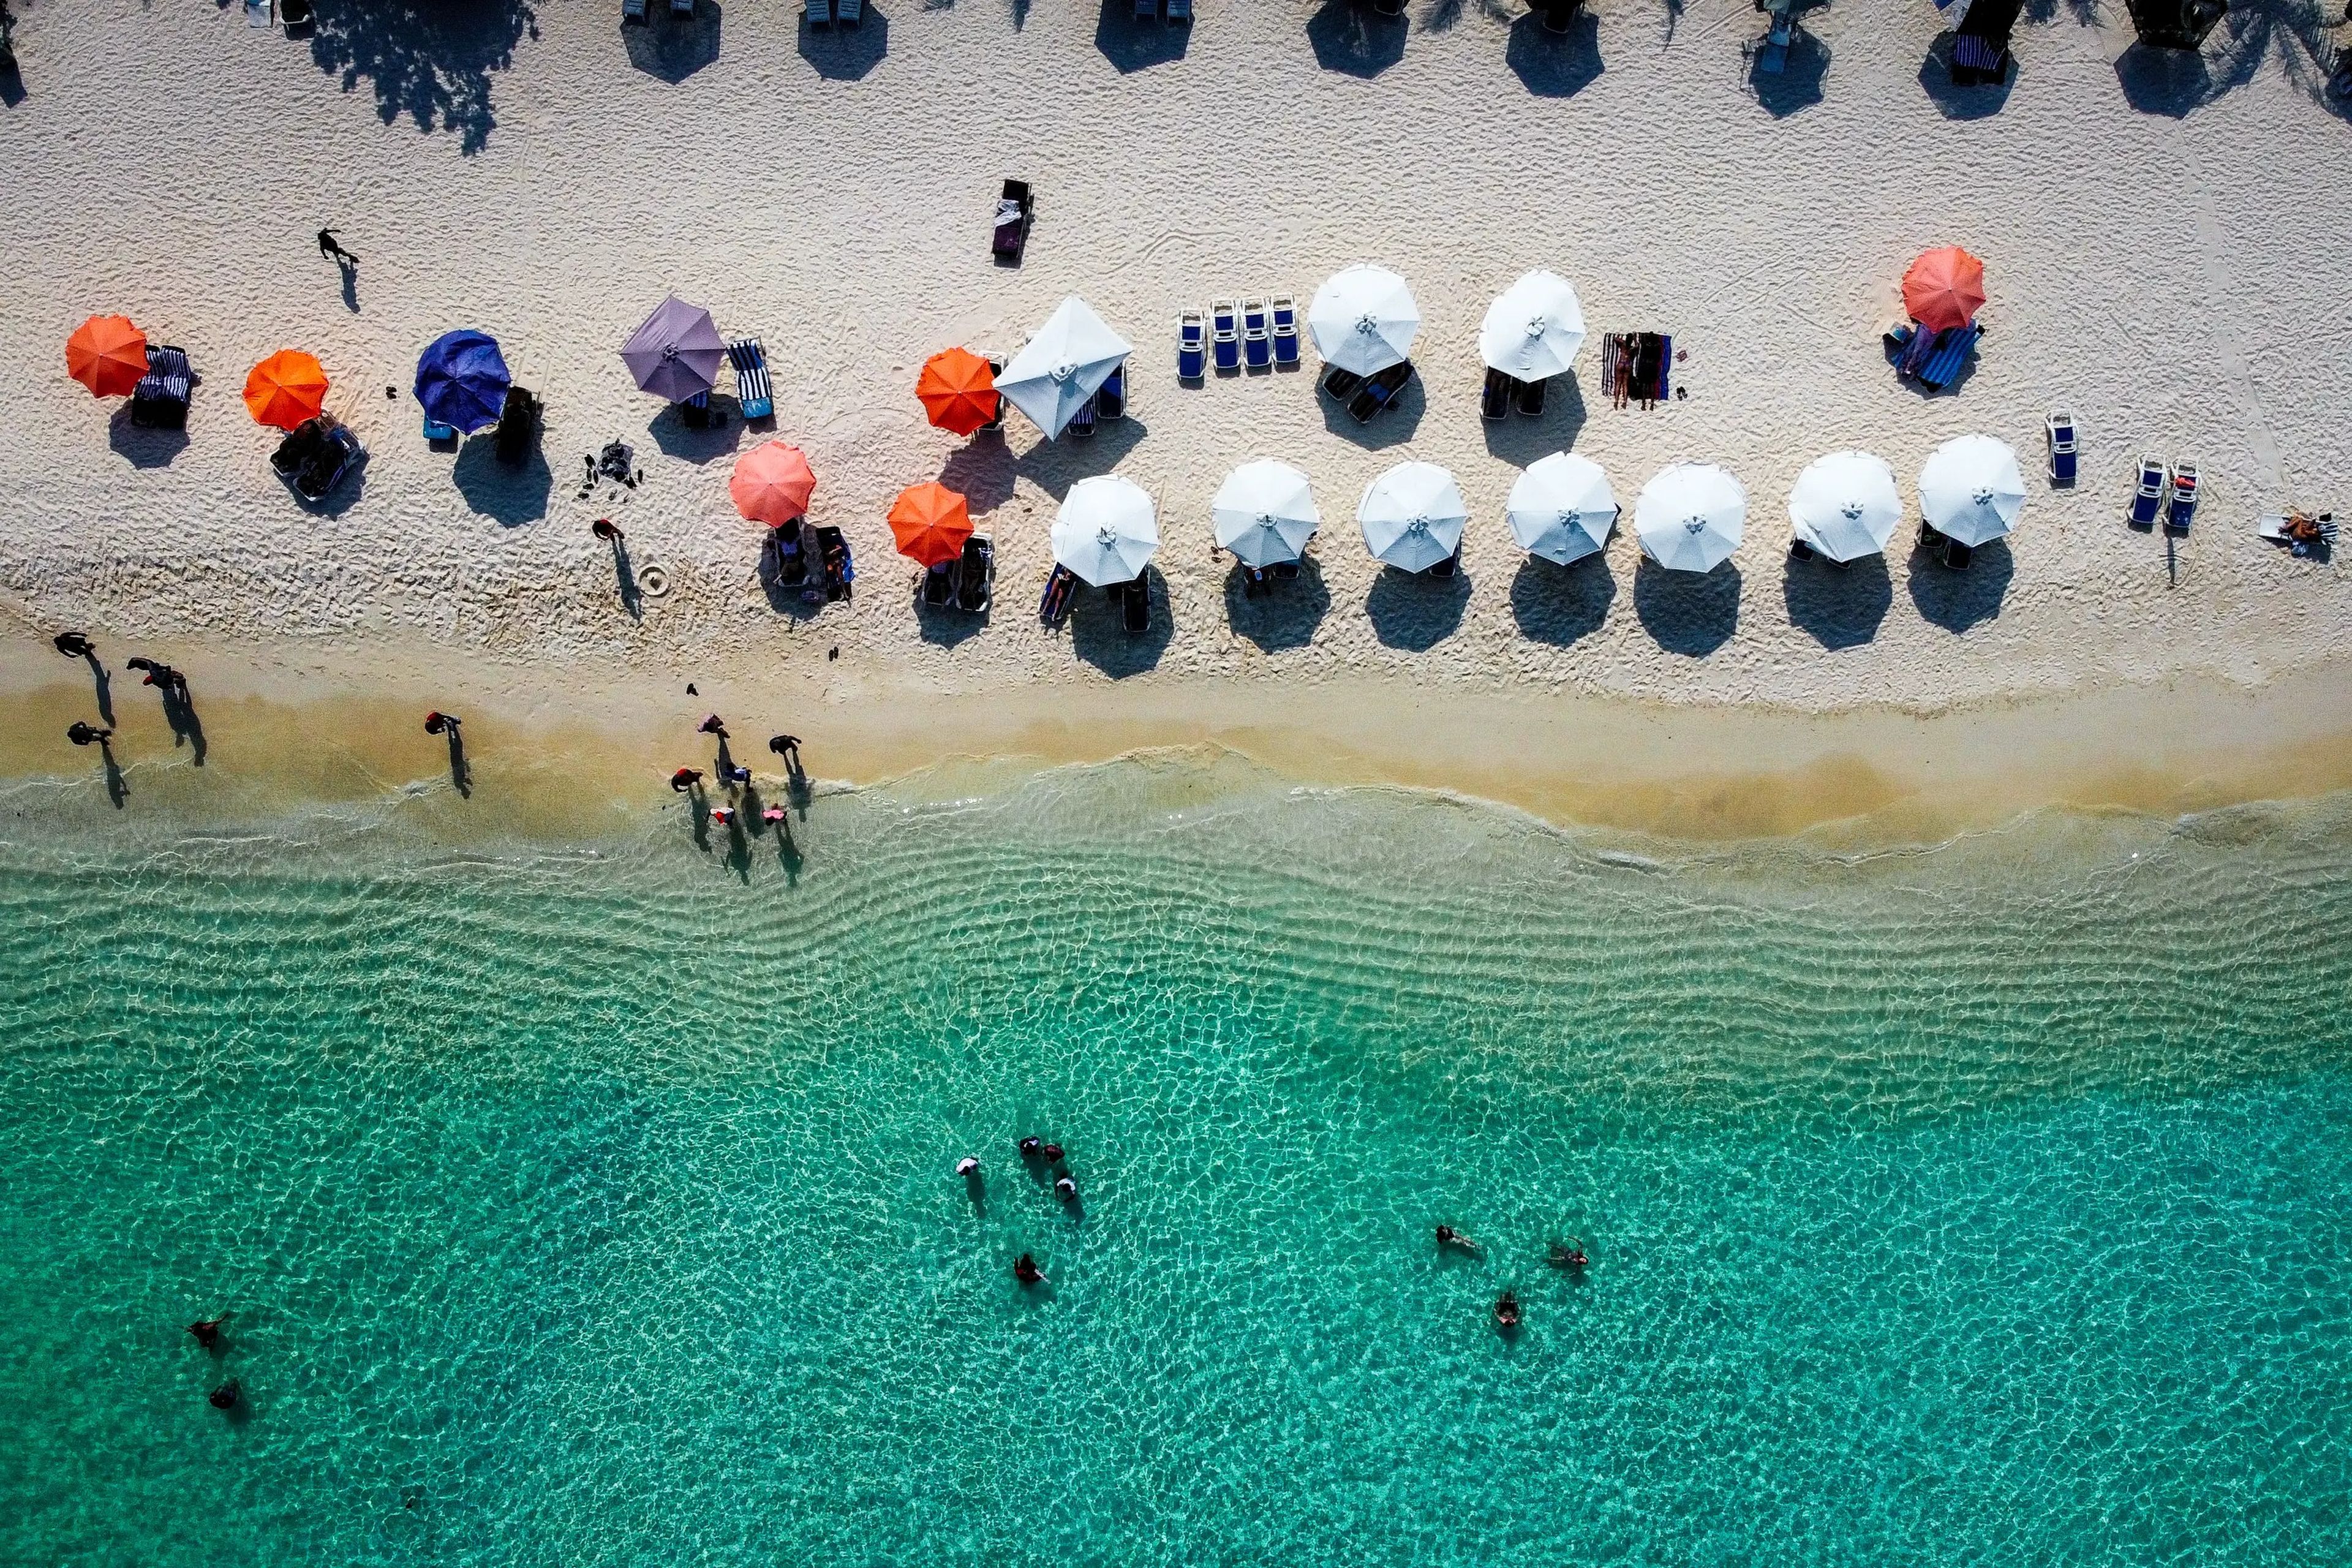 An aerial shot of Gulhi Island, with aqua-blue water and clean sand. There are multiple umbrellas on the beach, and people in the water and on the sand.